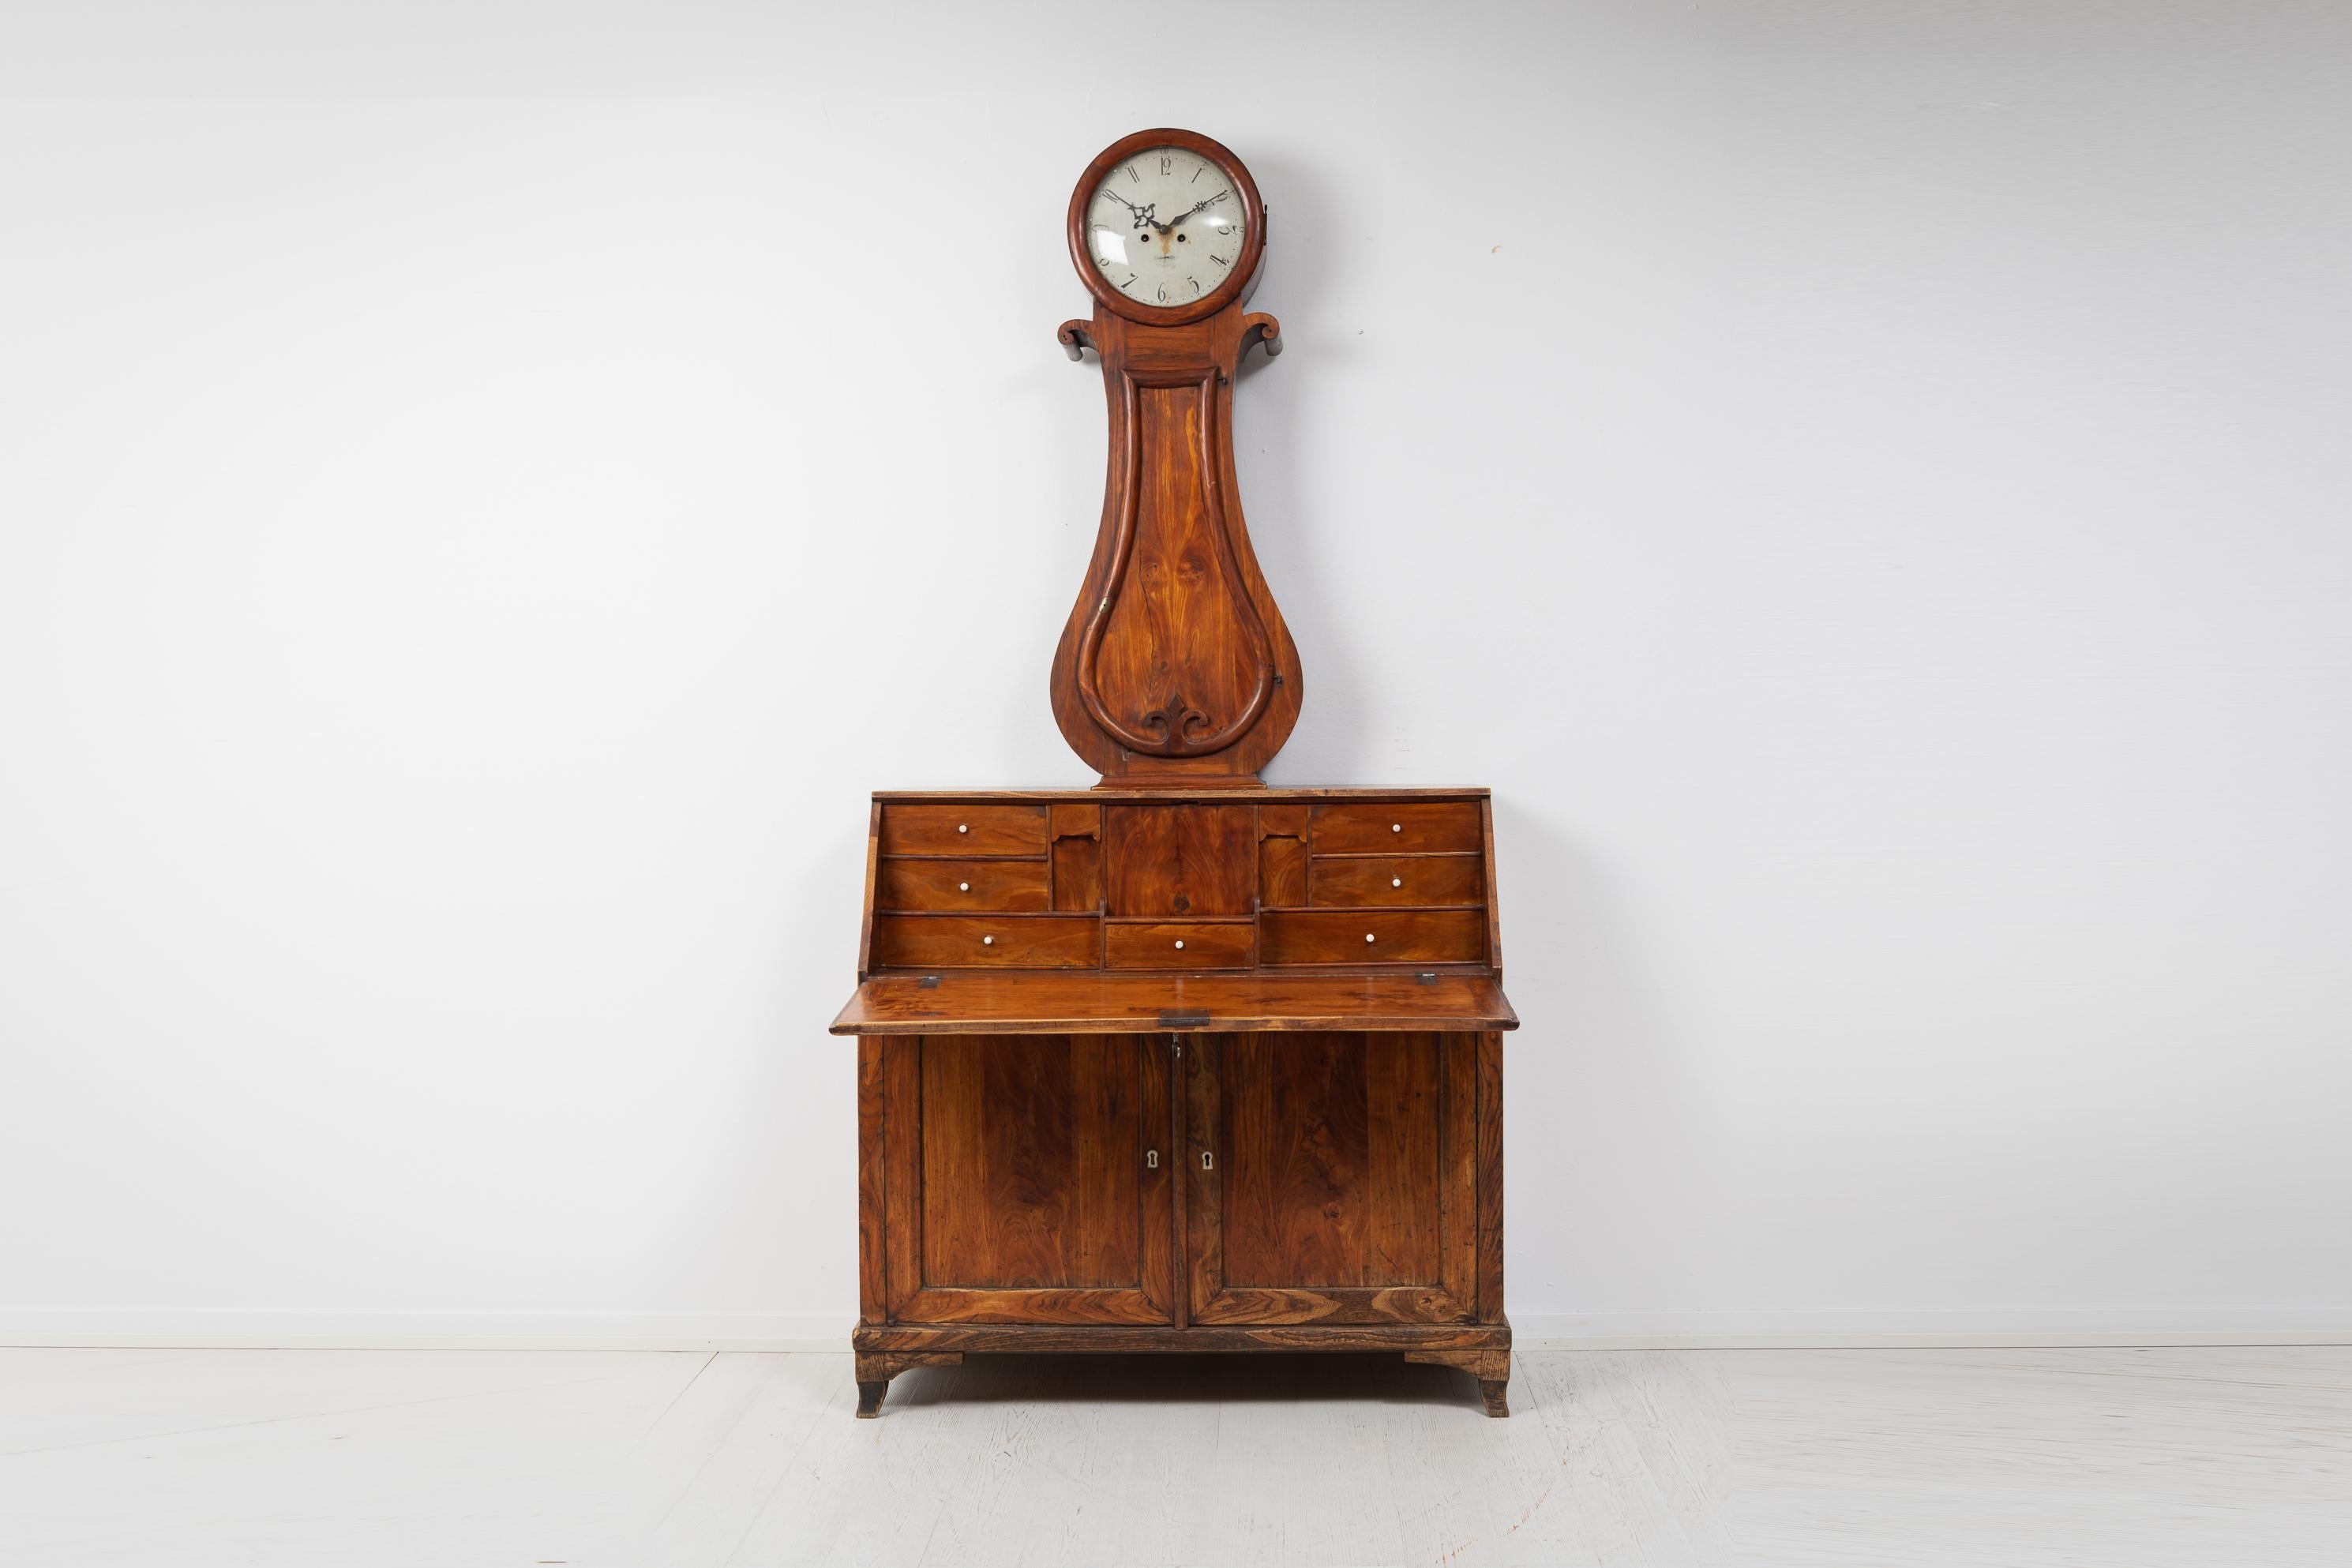 Swedish antique clock cabinet made during the early to mid 1800s, circa 1820 to 1840. The cabinet is veneered and waxed elm. The lower cabinet is a secretary desk and the upper consists of a long case clock. The cabinet has hardware and drawer pulls